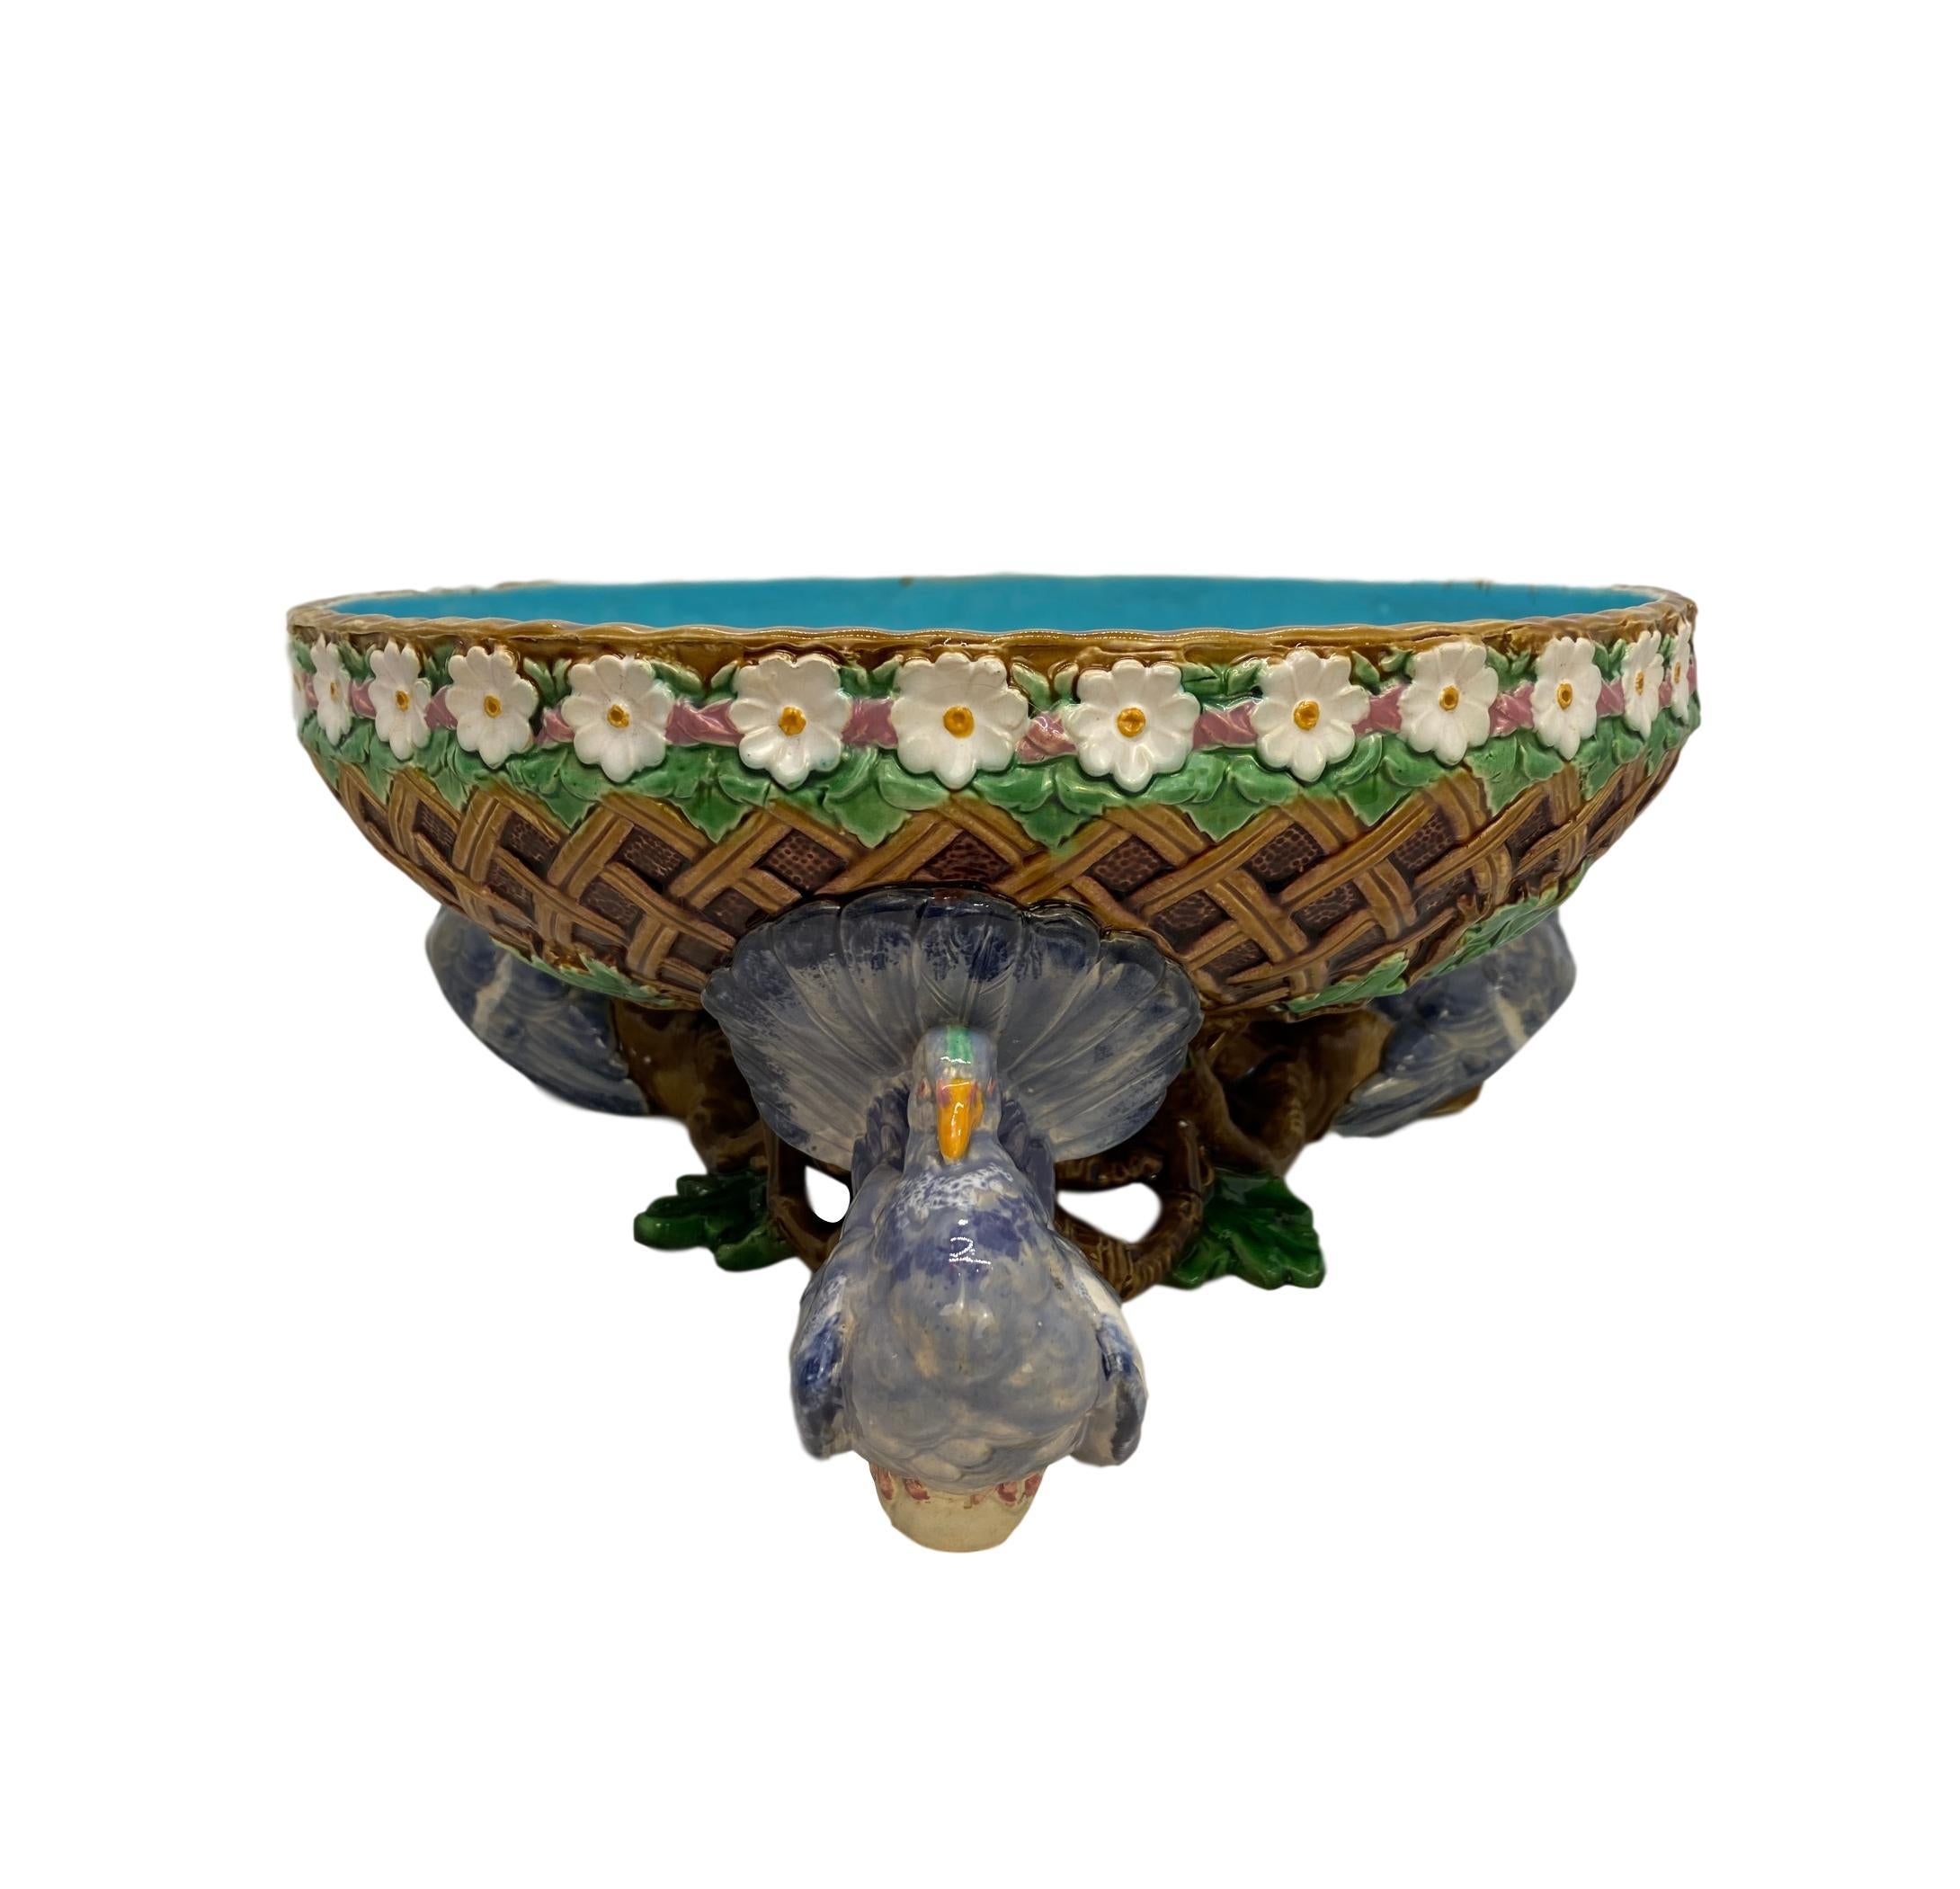 Minton Majolica fruit bowl, 12-ins. Dia., formed as a blind latticework basket with a turquoise interior, with a daisy chain molded rim, supported by three fan-tail pigeons glazed in shades of blue, white, and grey with yellow beaks, on oak branches